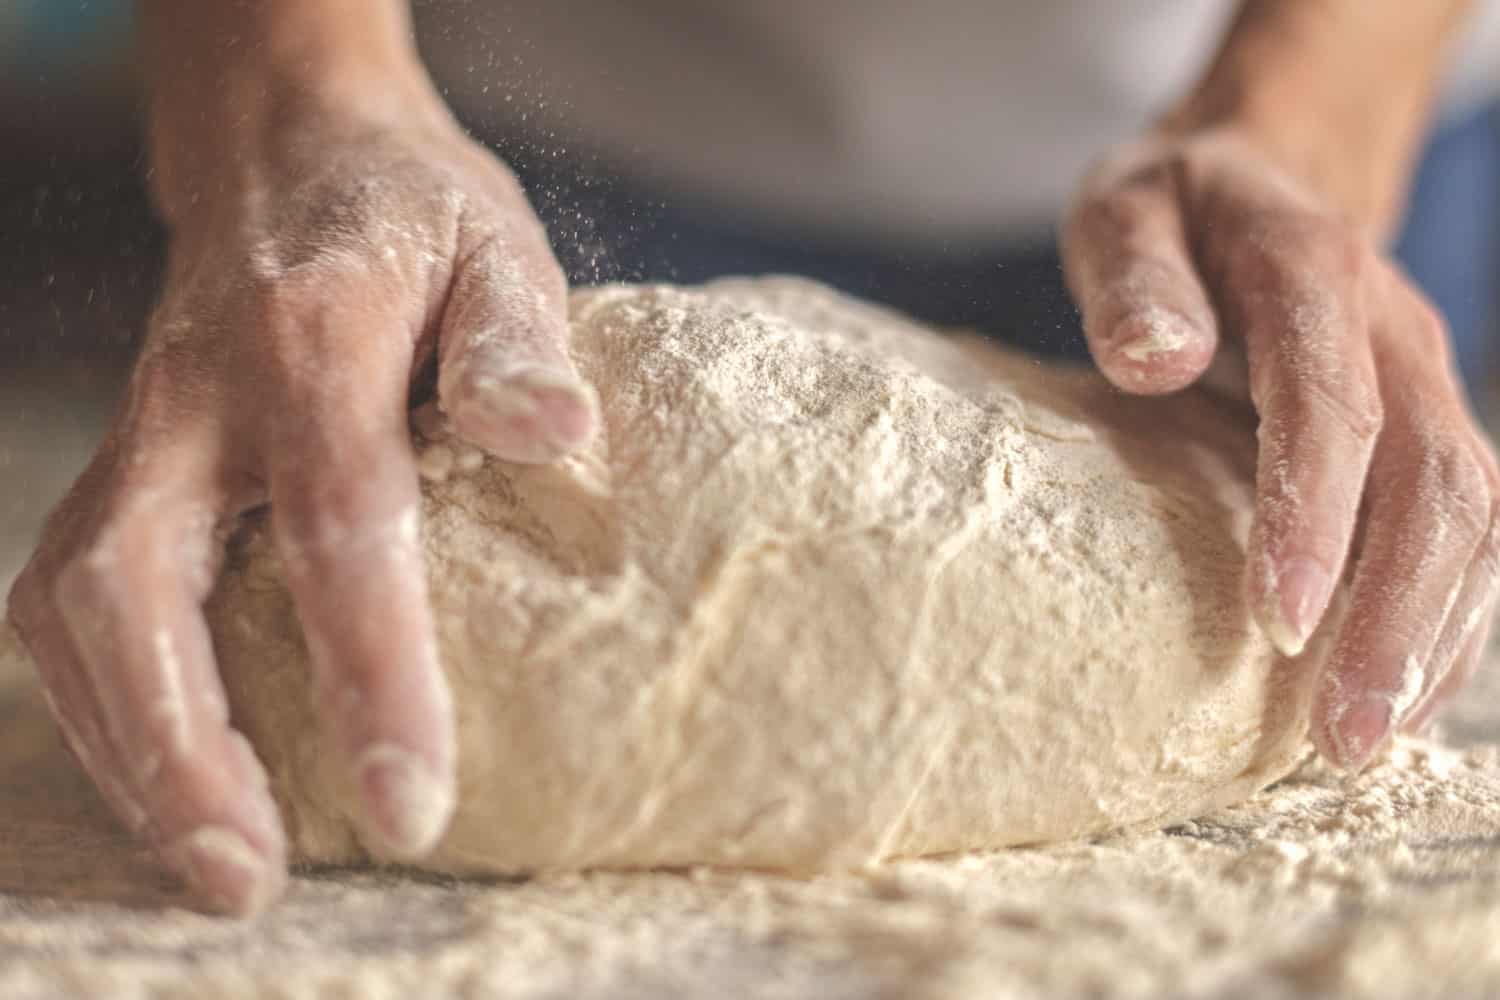 Molding dough can be extraordinary role it needs passion to perfectly mold it